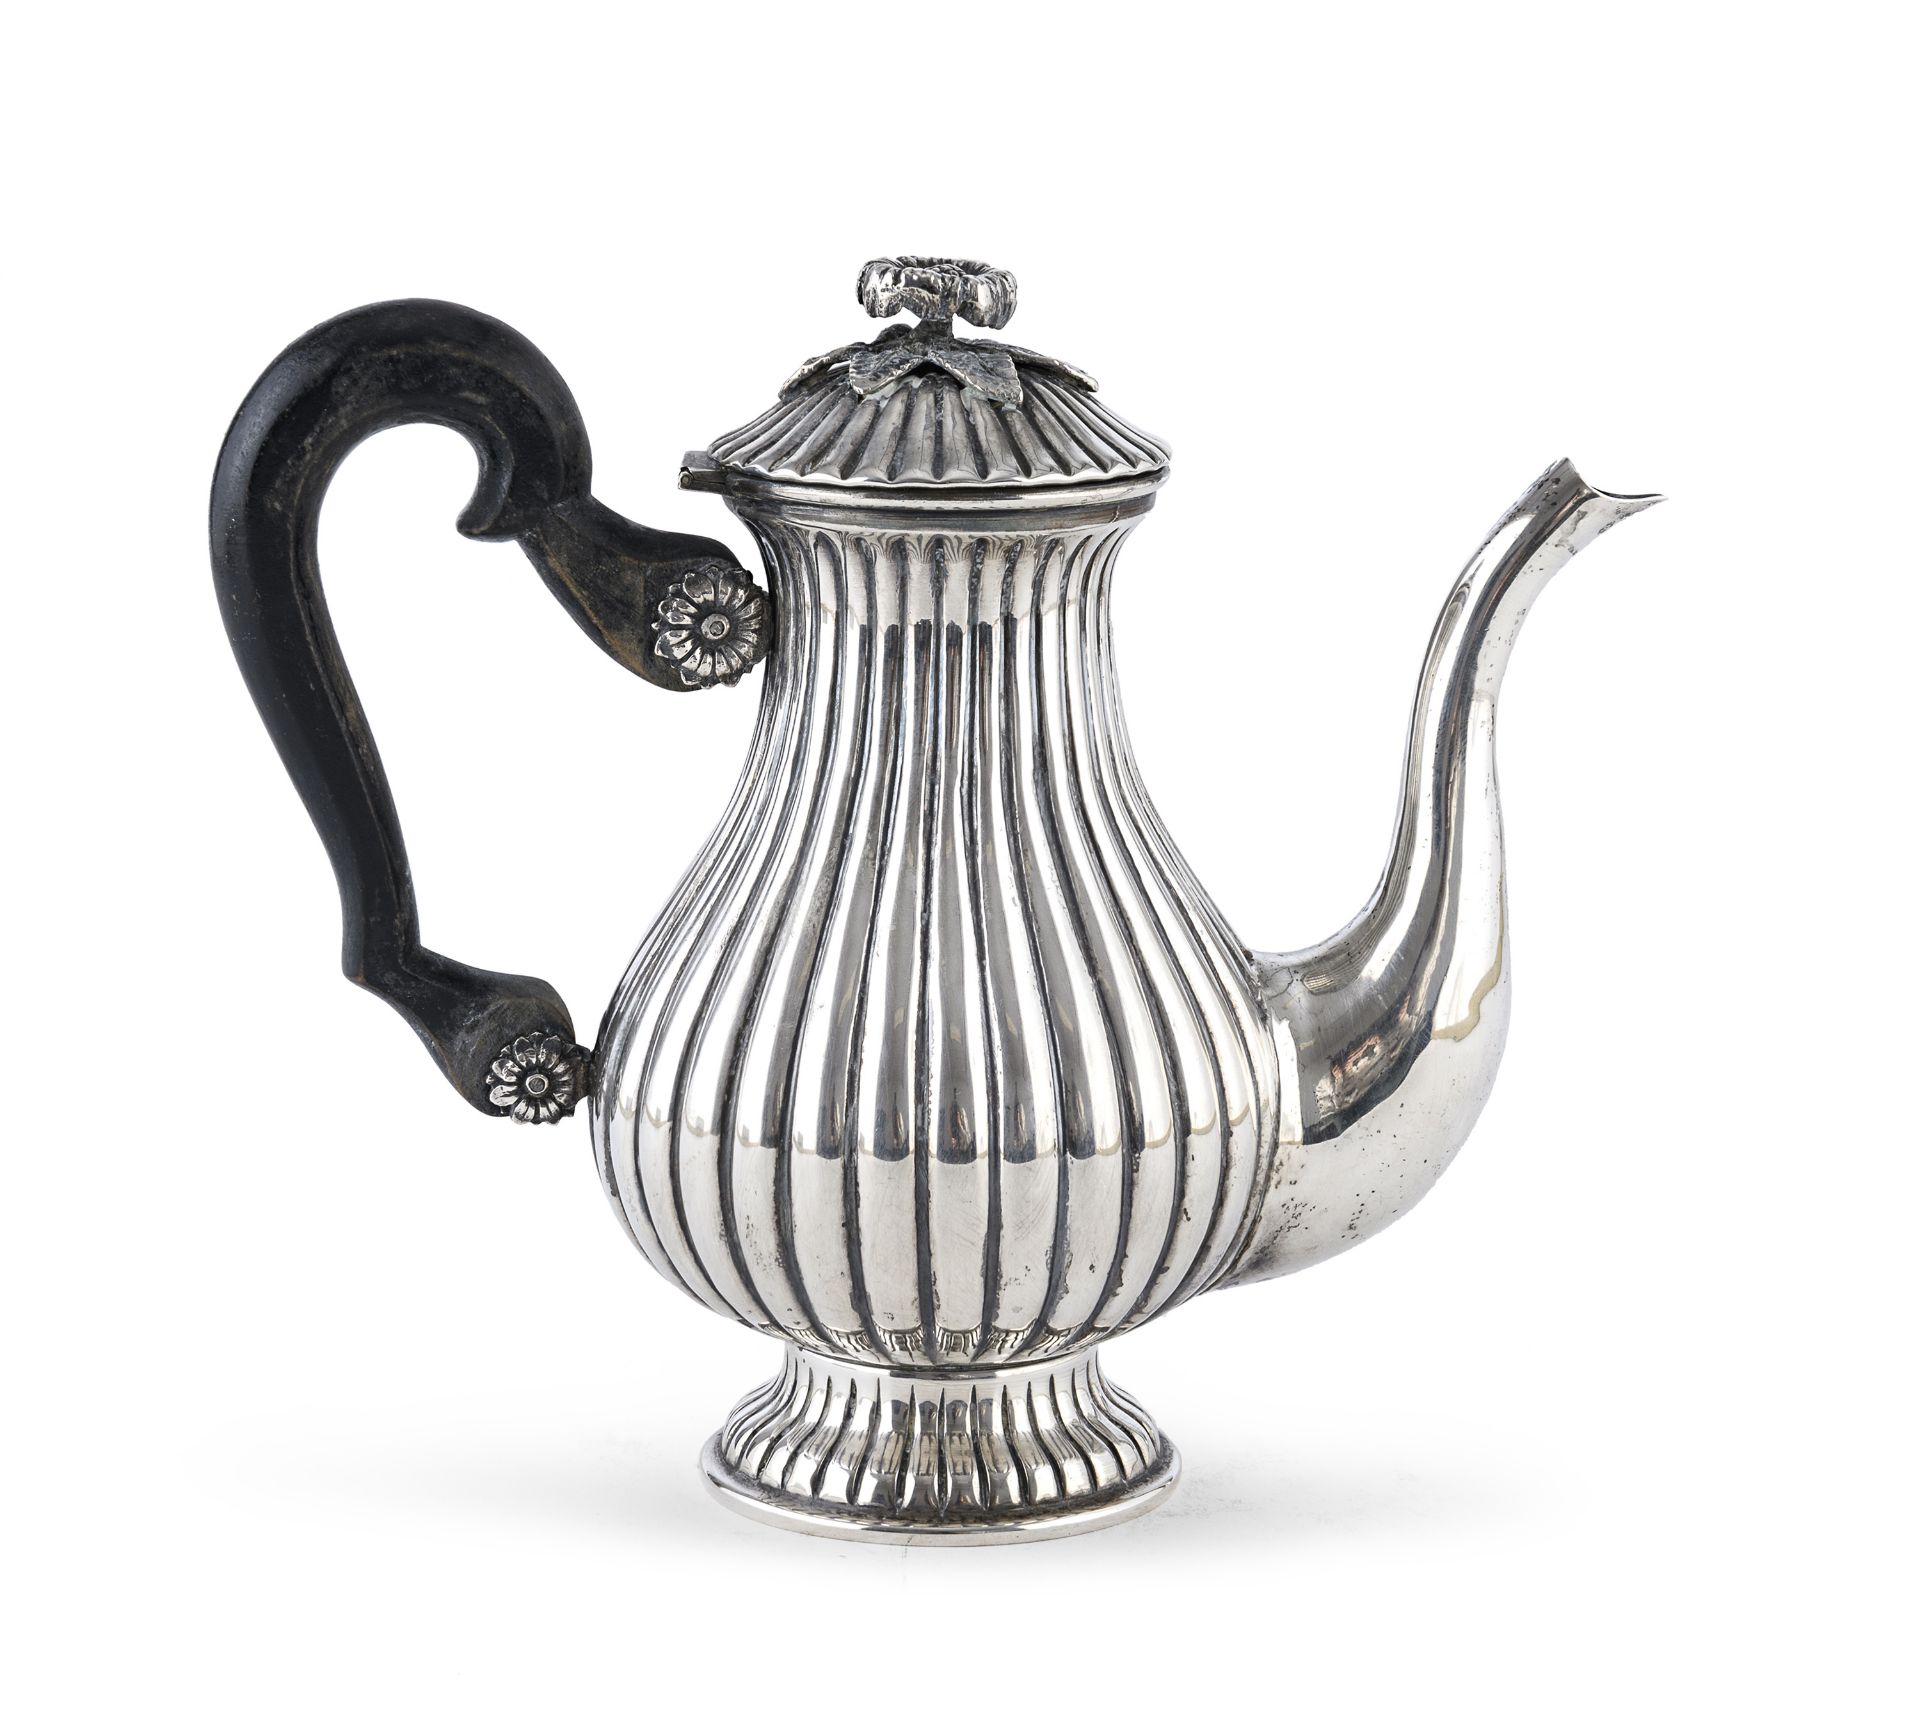 SILVER COFFEE POT KINGDOM OF ITALY END OF THE 19TH CENTURY